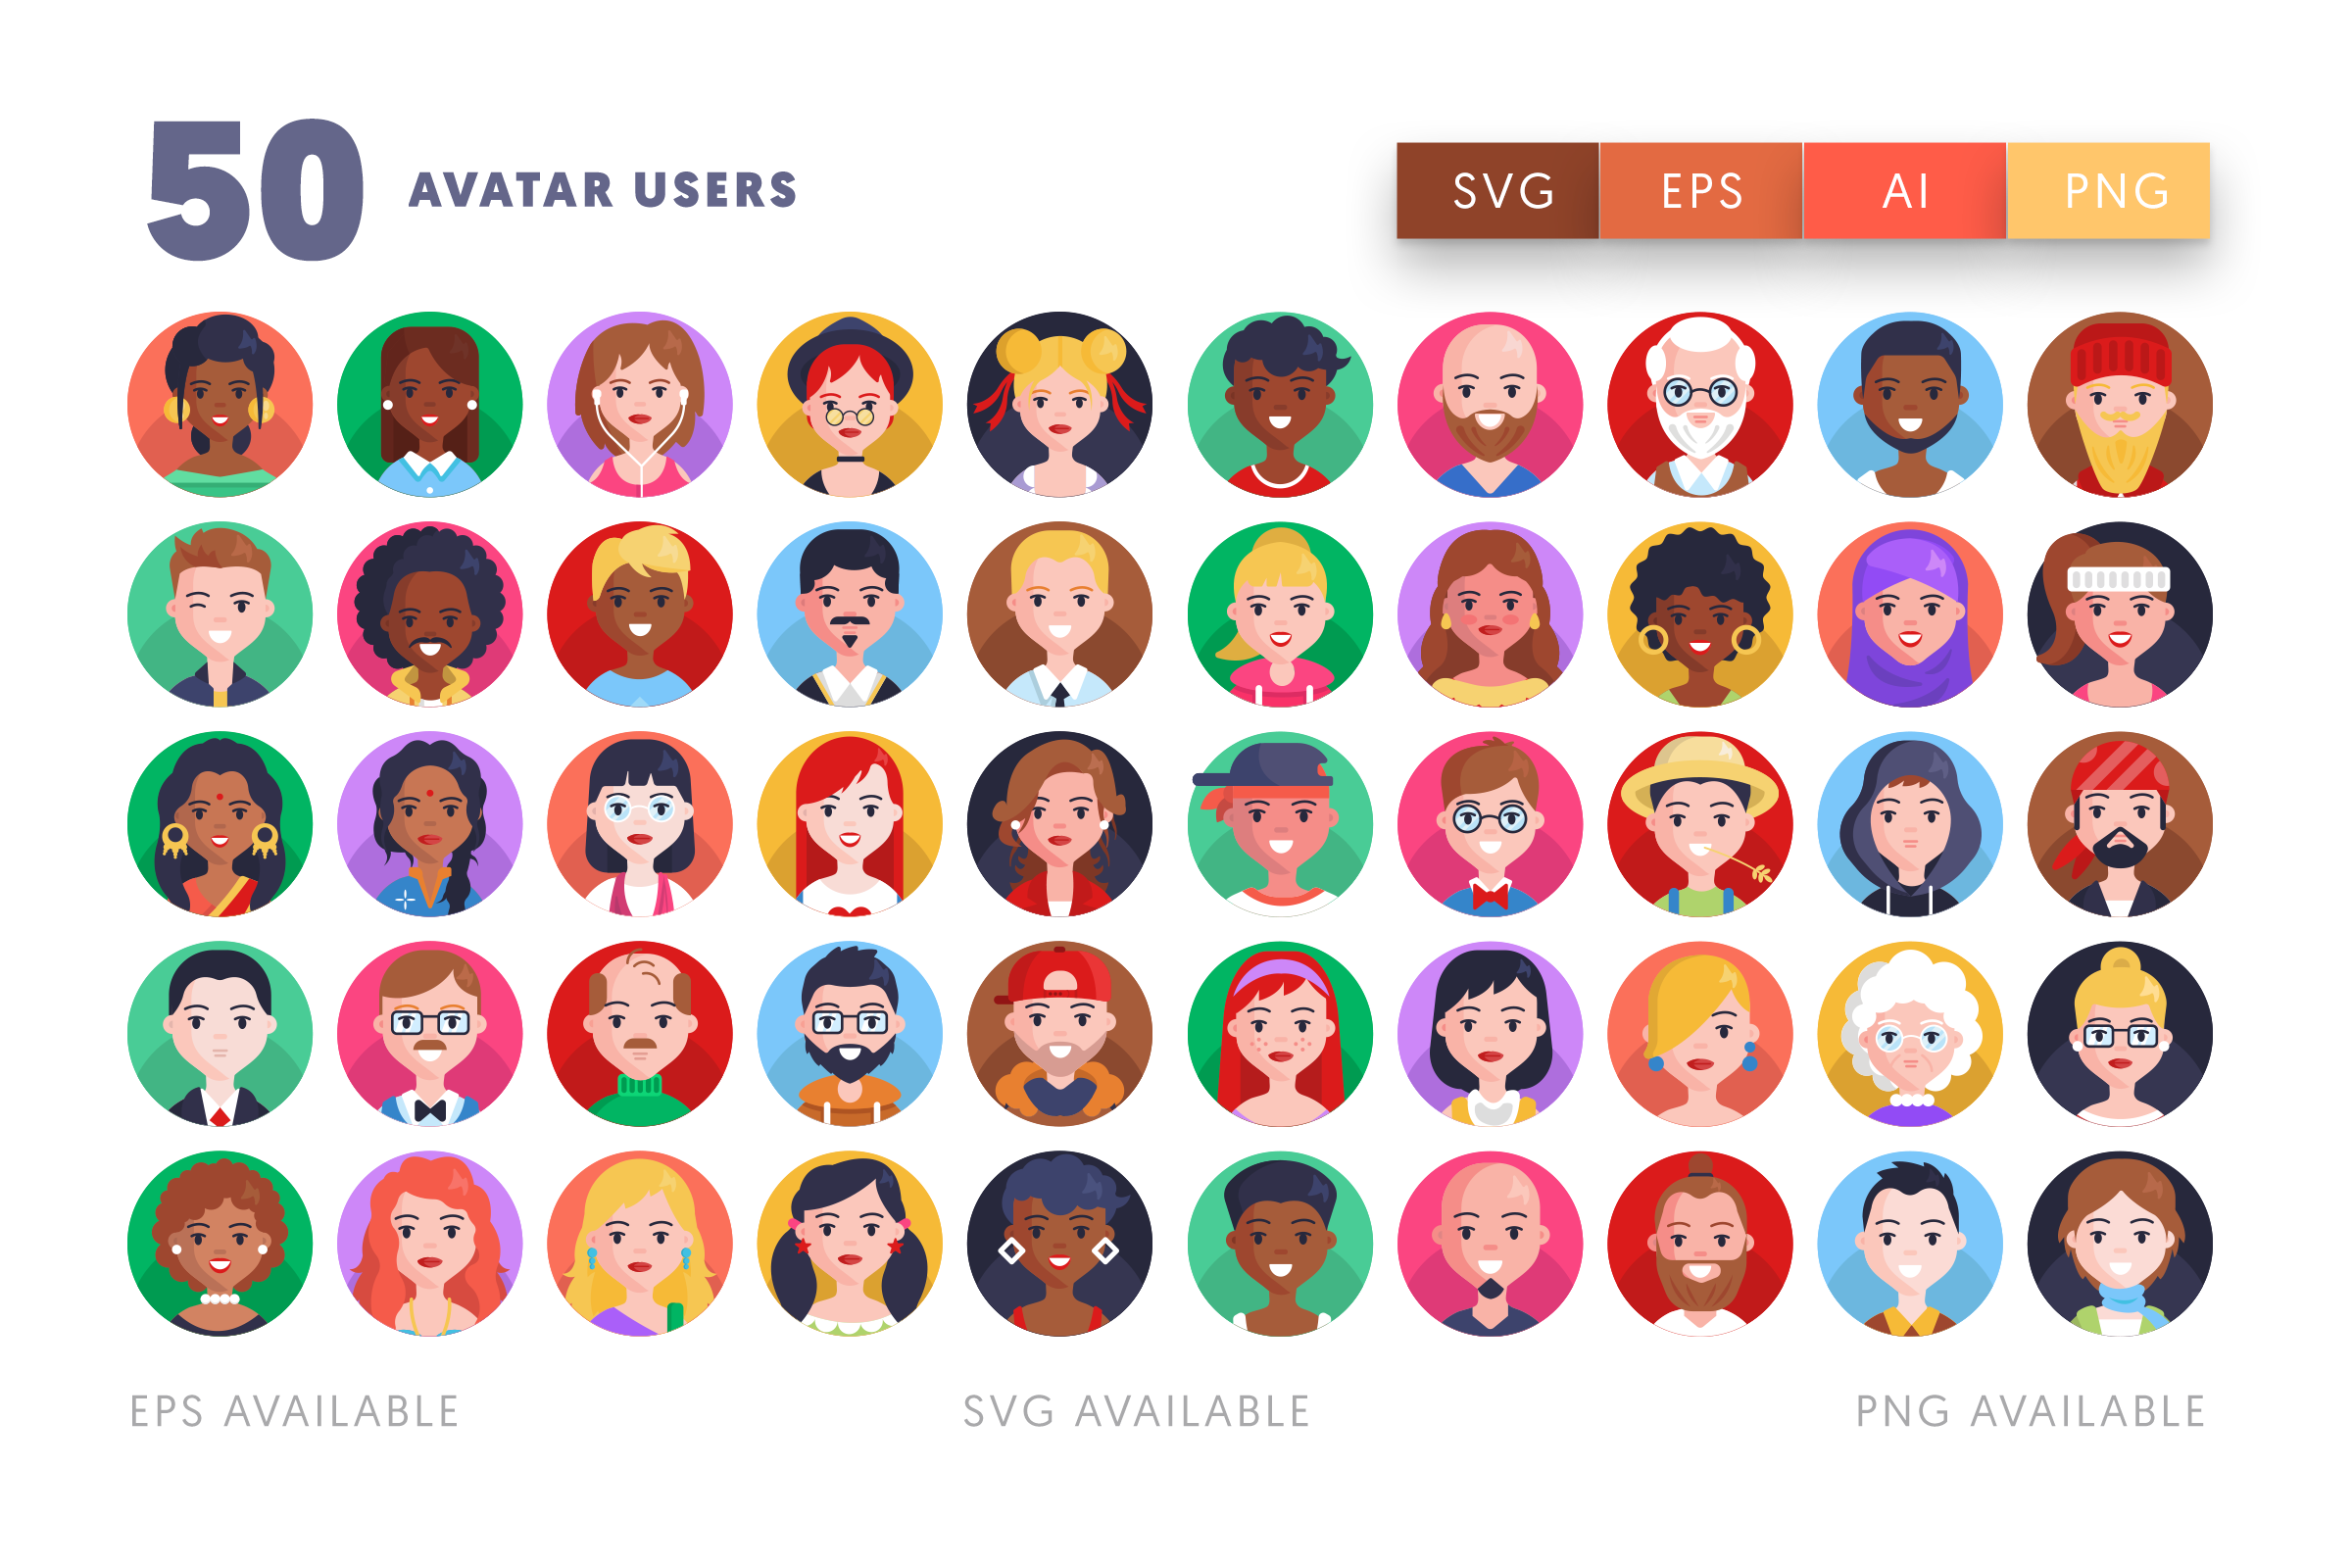 Avatar Users icons png/svg/eps